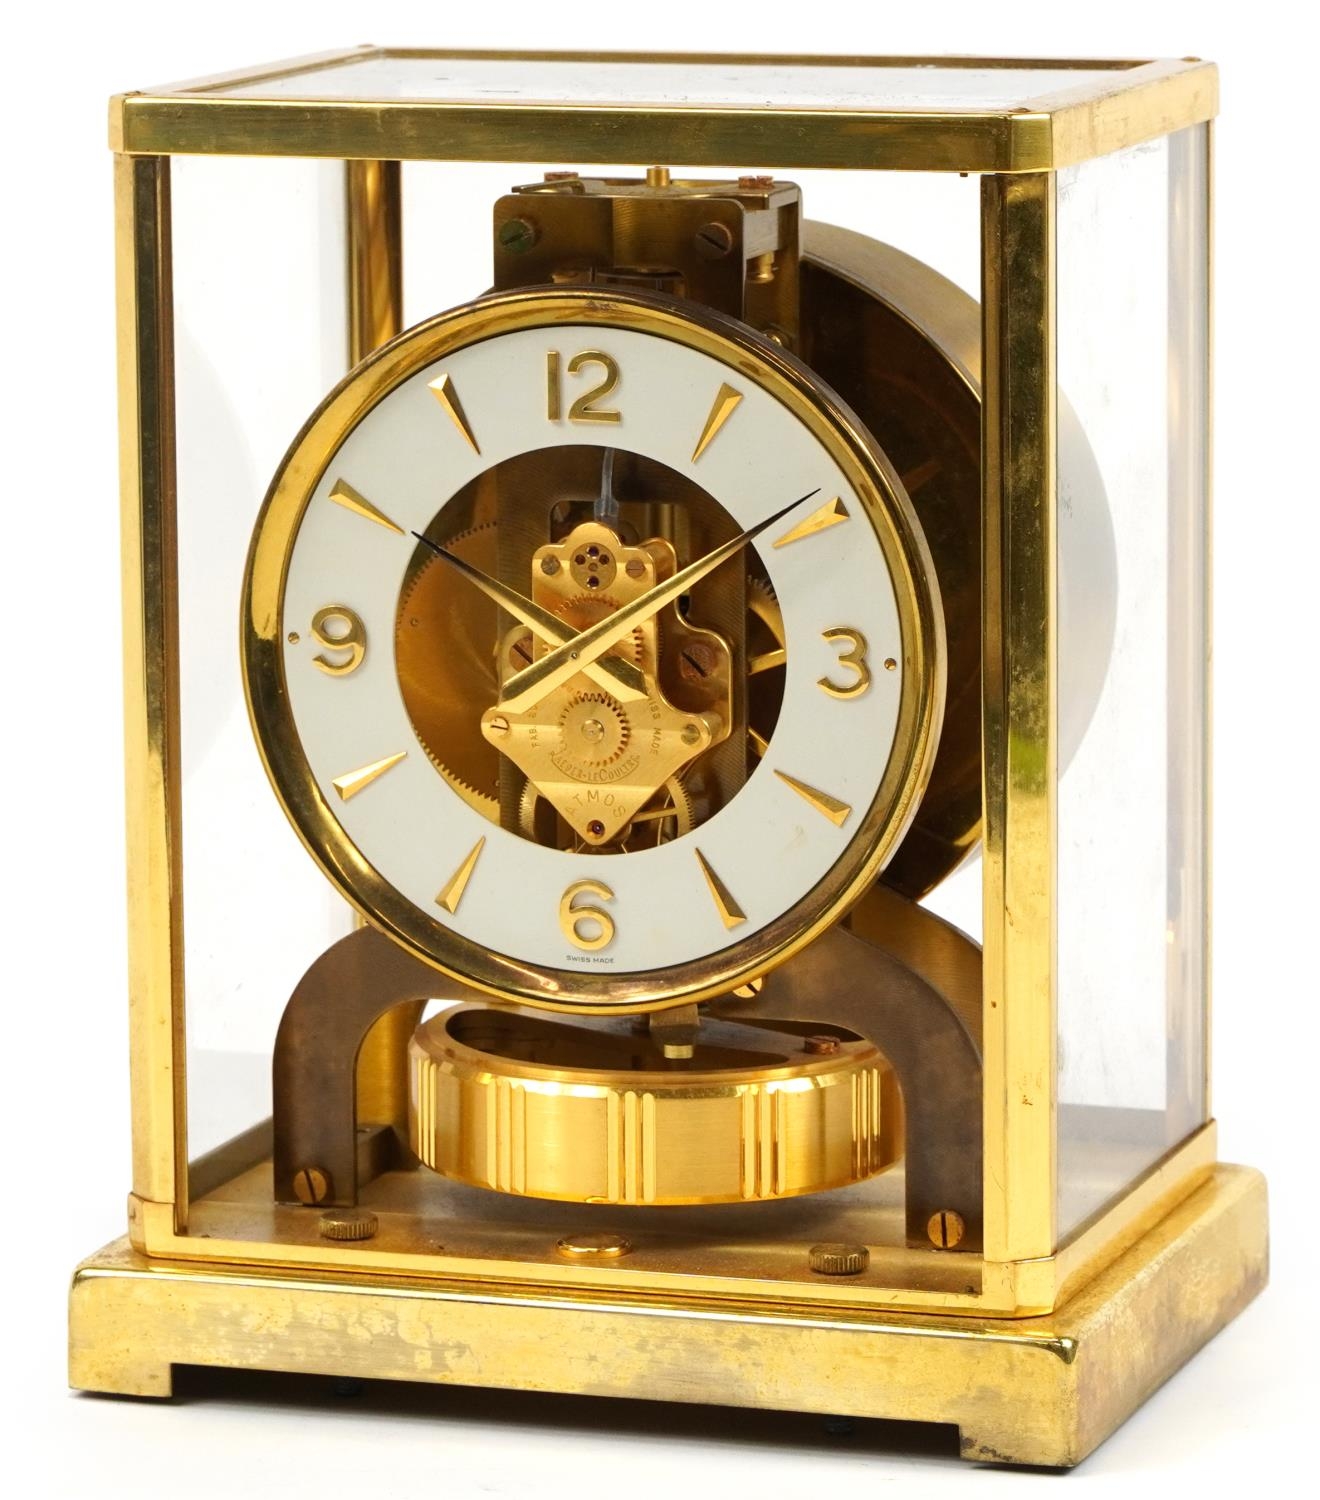 Jaeger LeCoultre brass cased Atmos clock, the circular chapter ring having Arabic numerals, serial